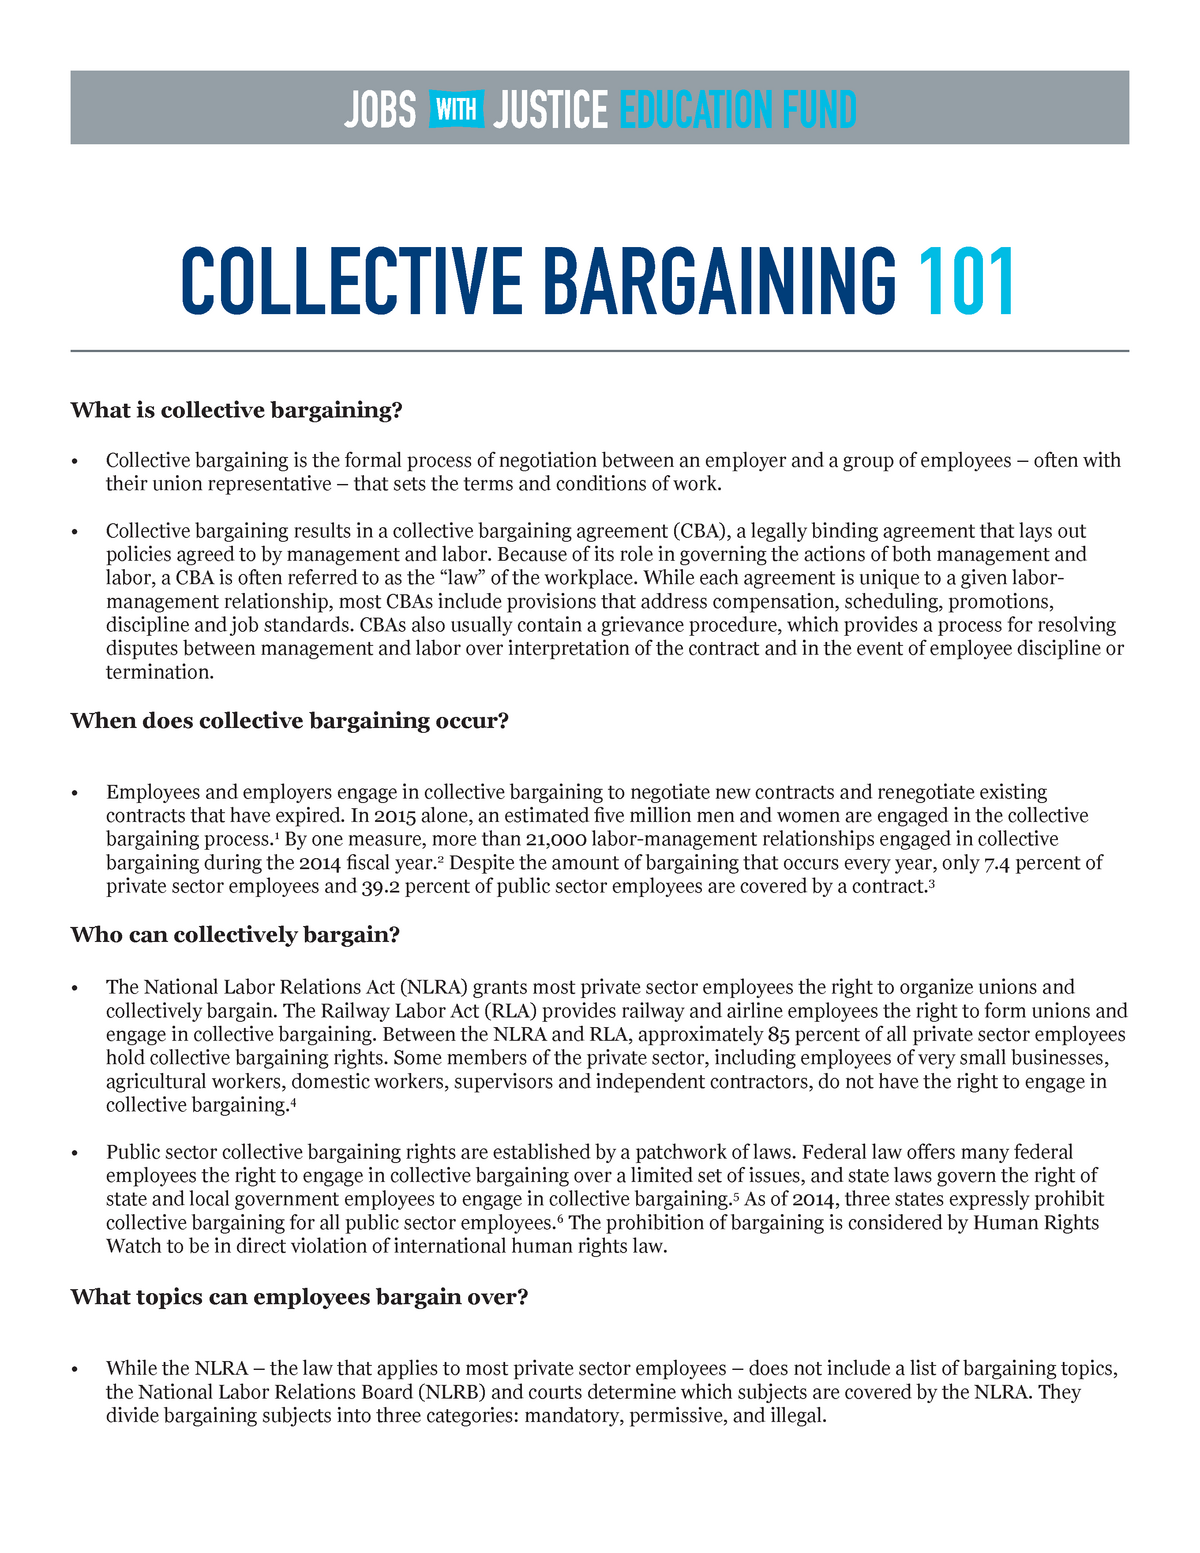 Collectivebargaining 101 COLLECTIVE BARGAINING 101 What is collective